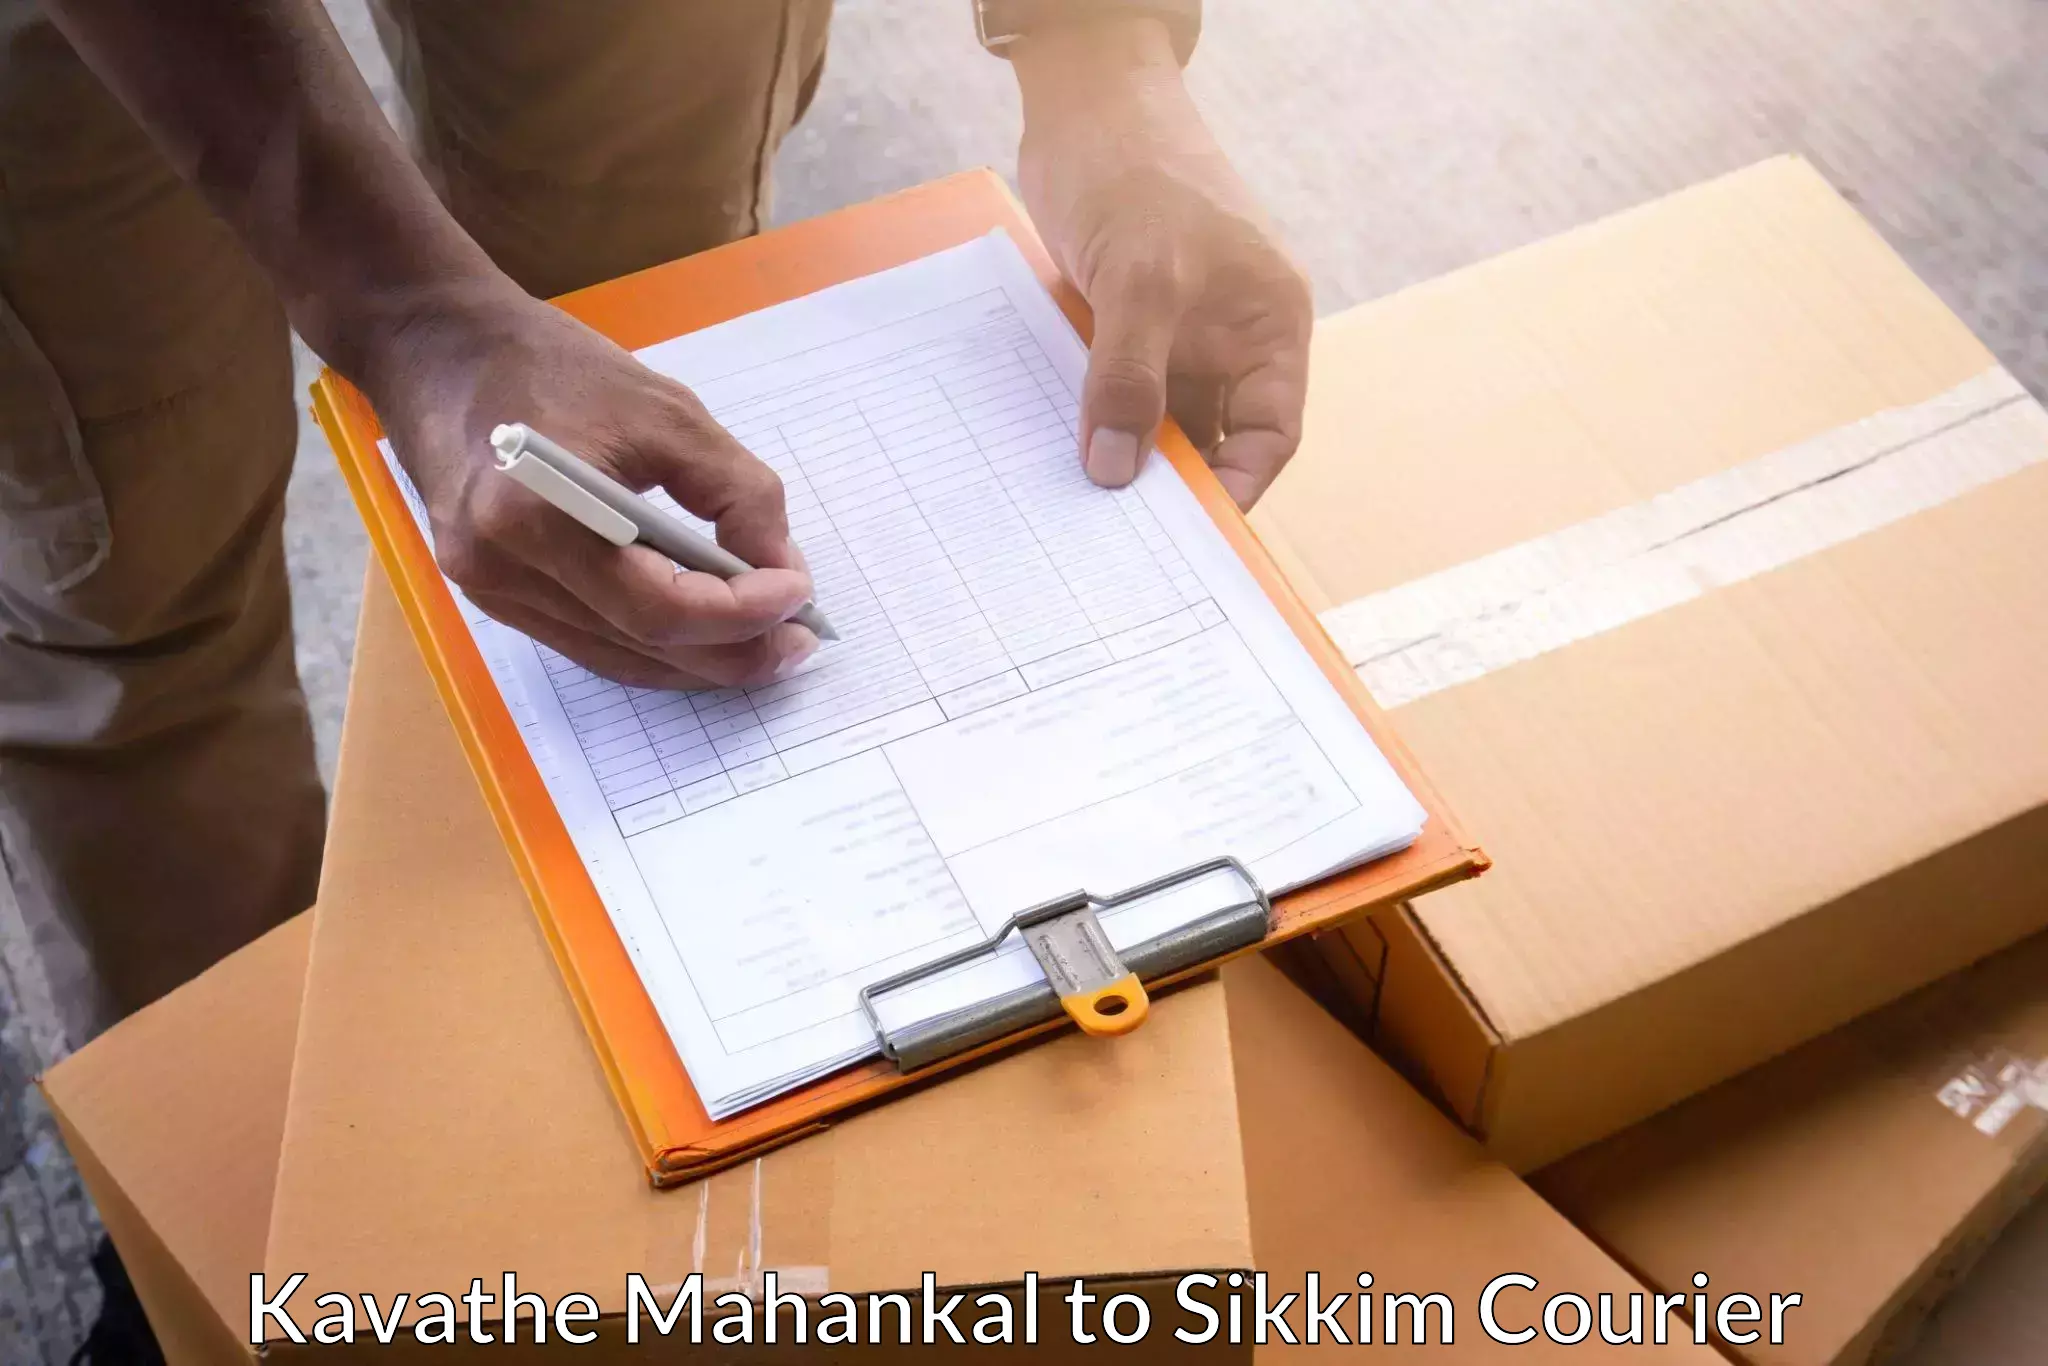 Courier service innovation Kavathe Mahankal to South Sikkim